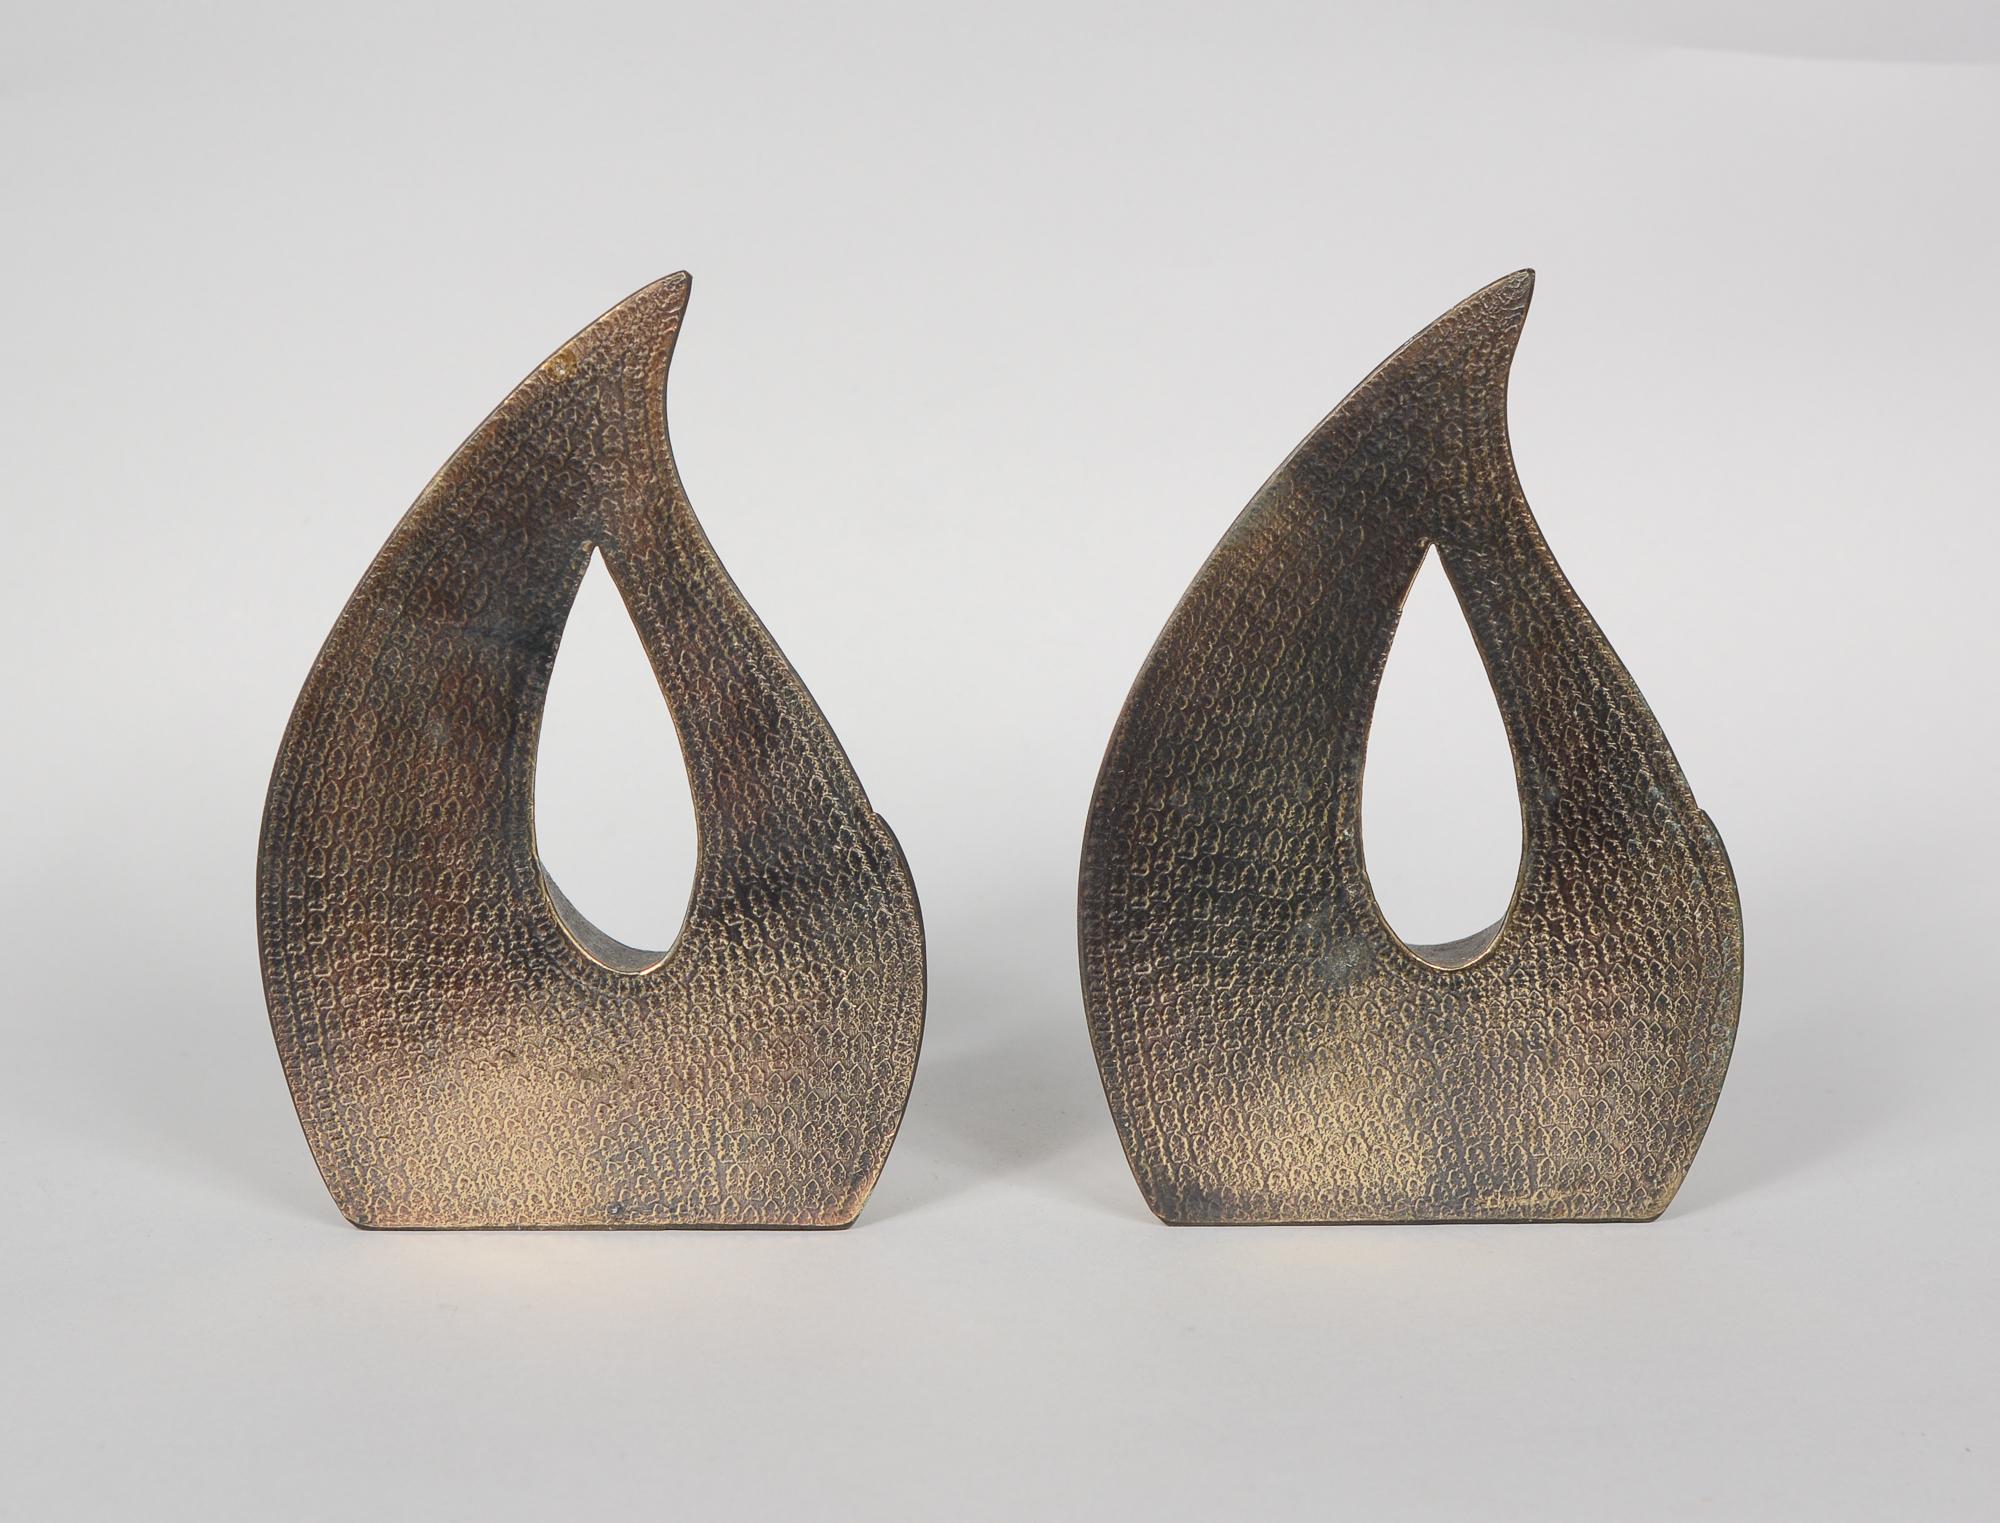 American Jenfred Ware Flame Bookends by Ben Seibel for Raymor